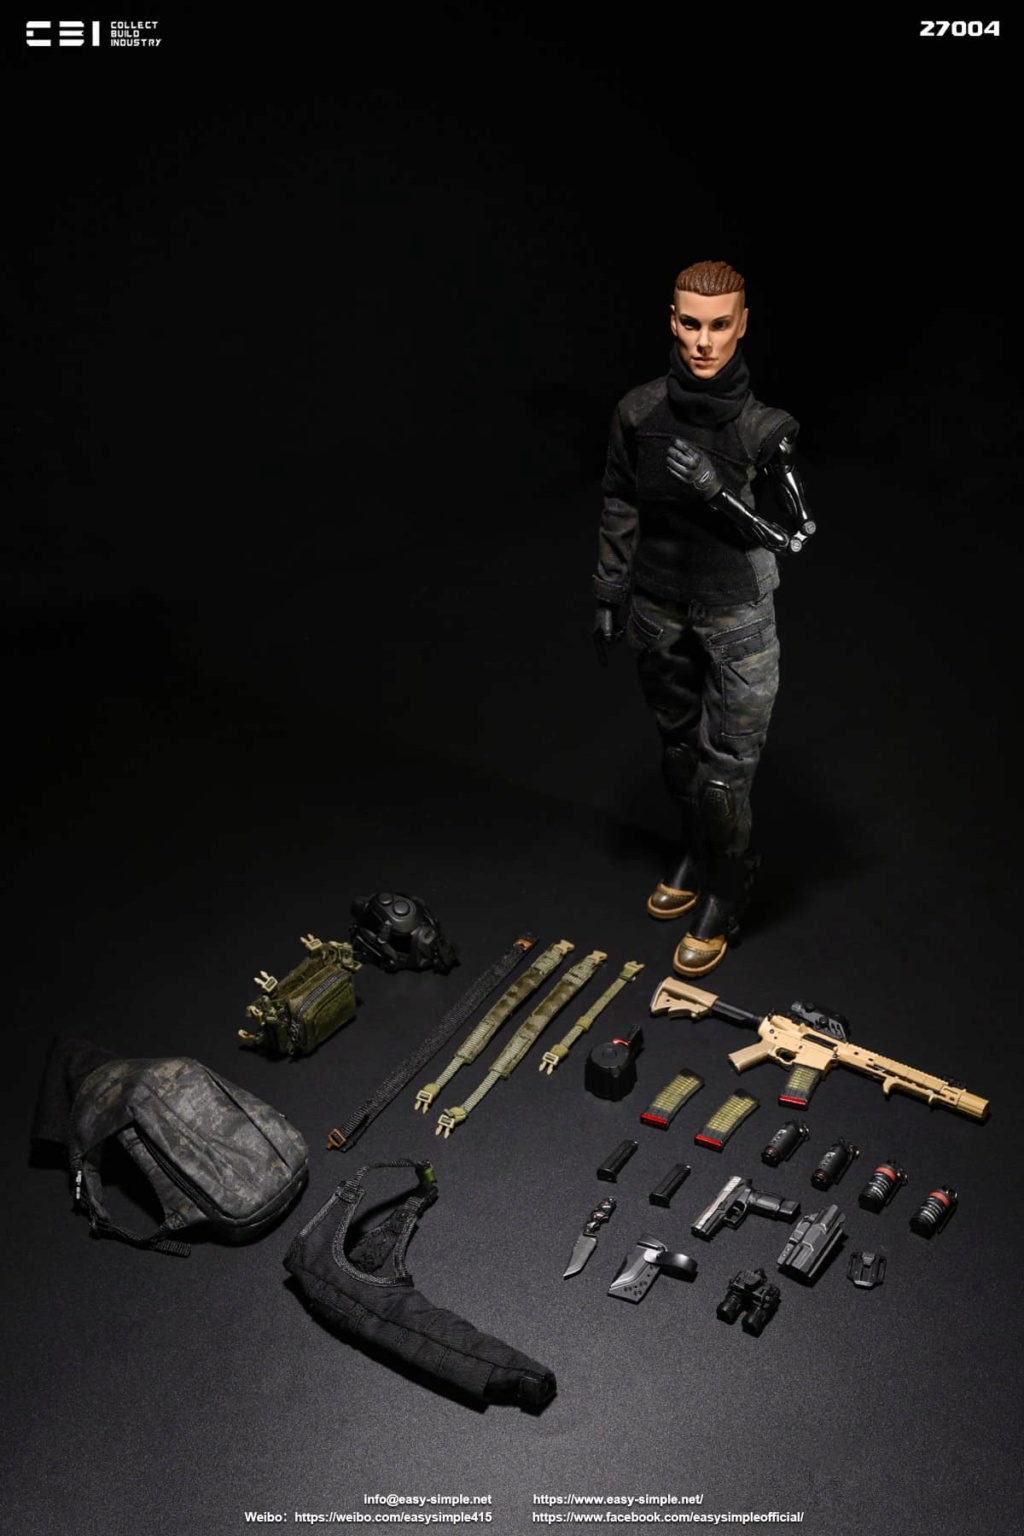 easy - NEW PRODUCT: CBI & Easy&Simple: 27004 1/6 ERICA STORM - TASK FORCE 58 CPO action figure 5649